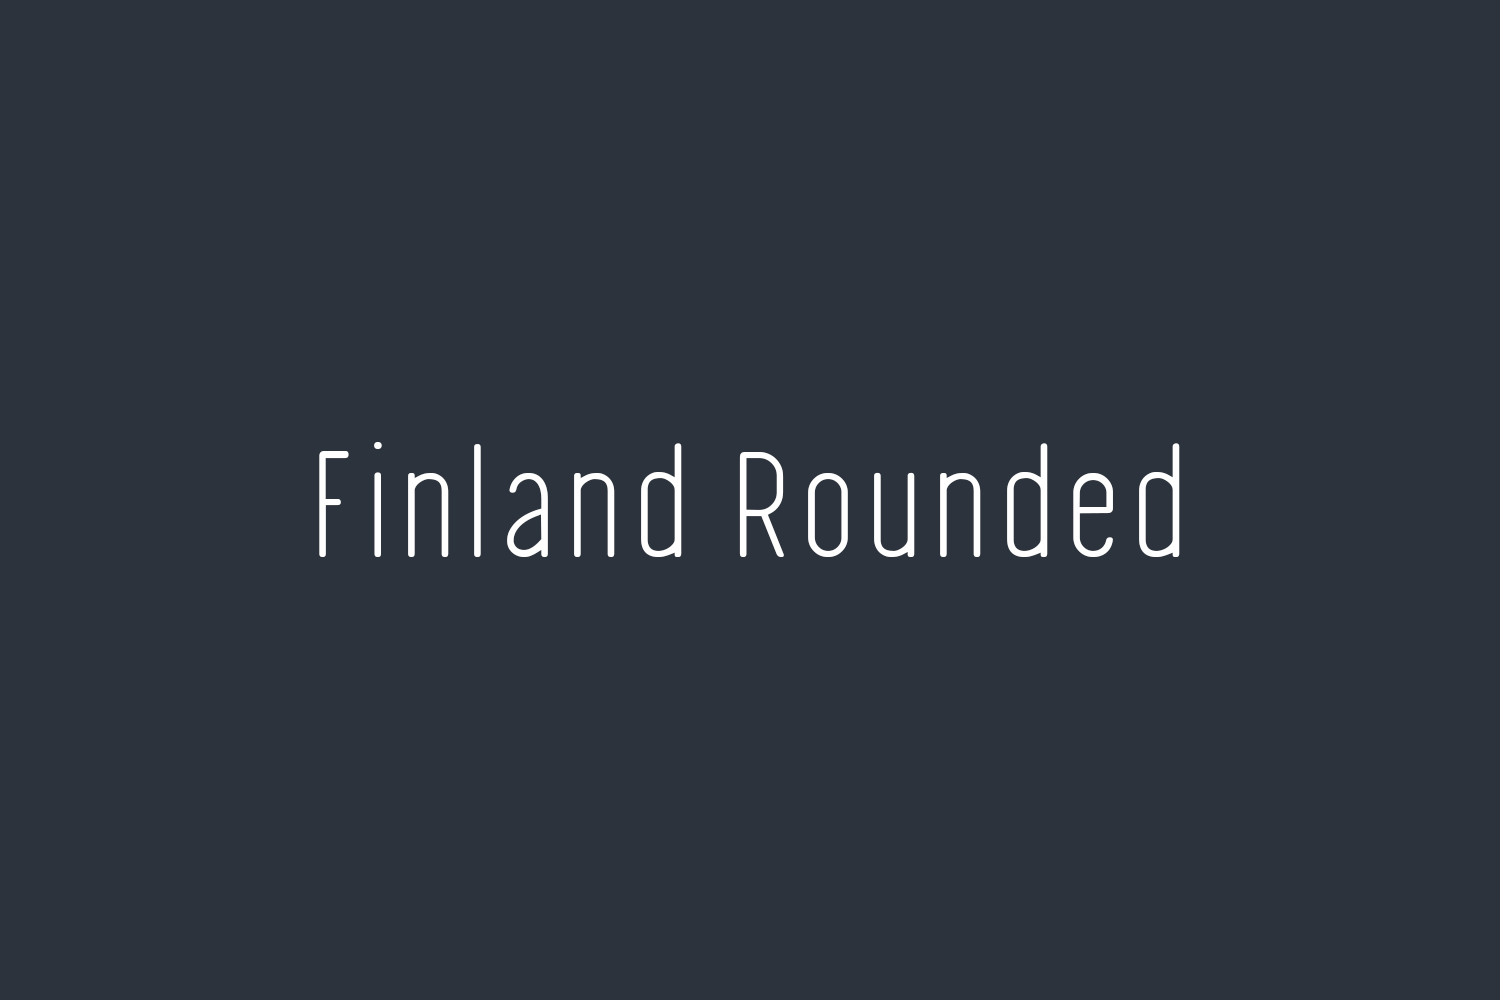 Finland Rounded Free Font